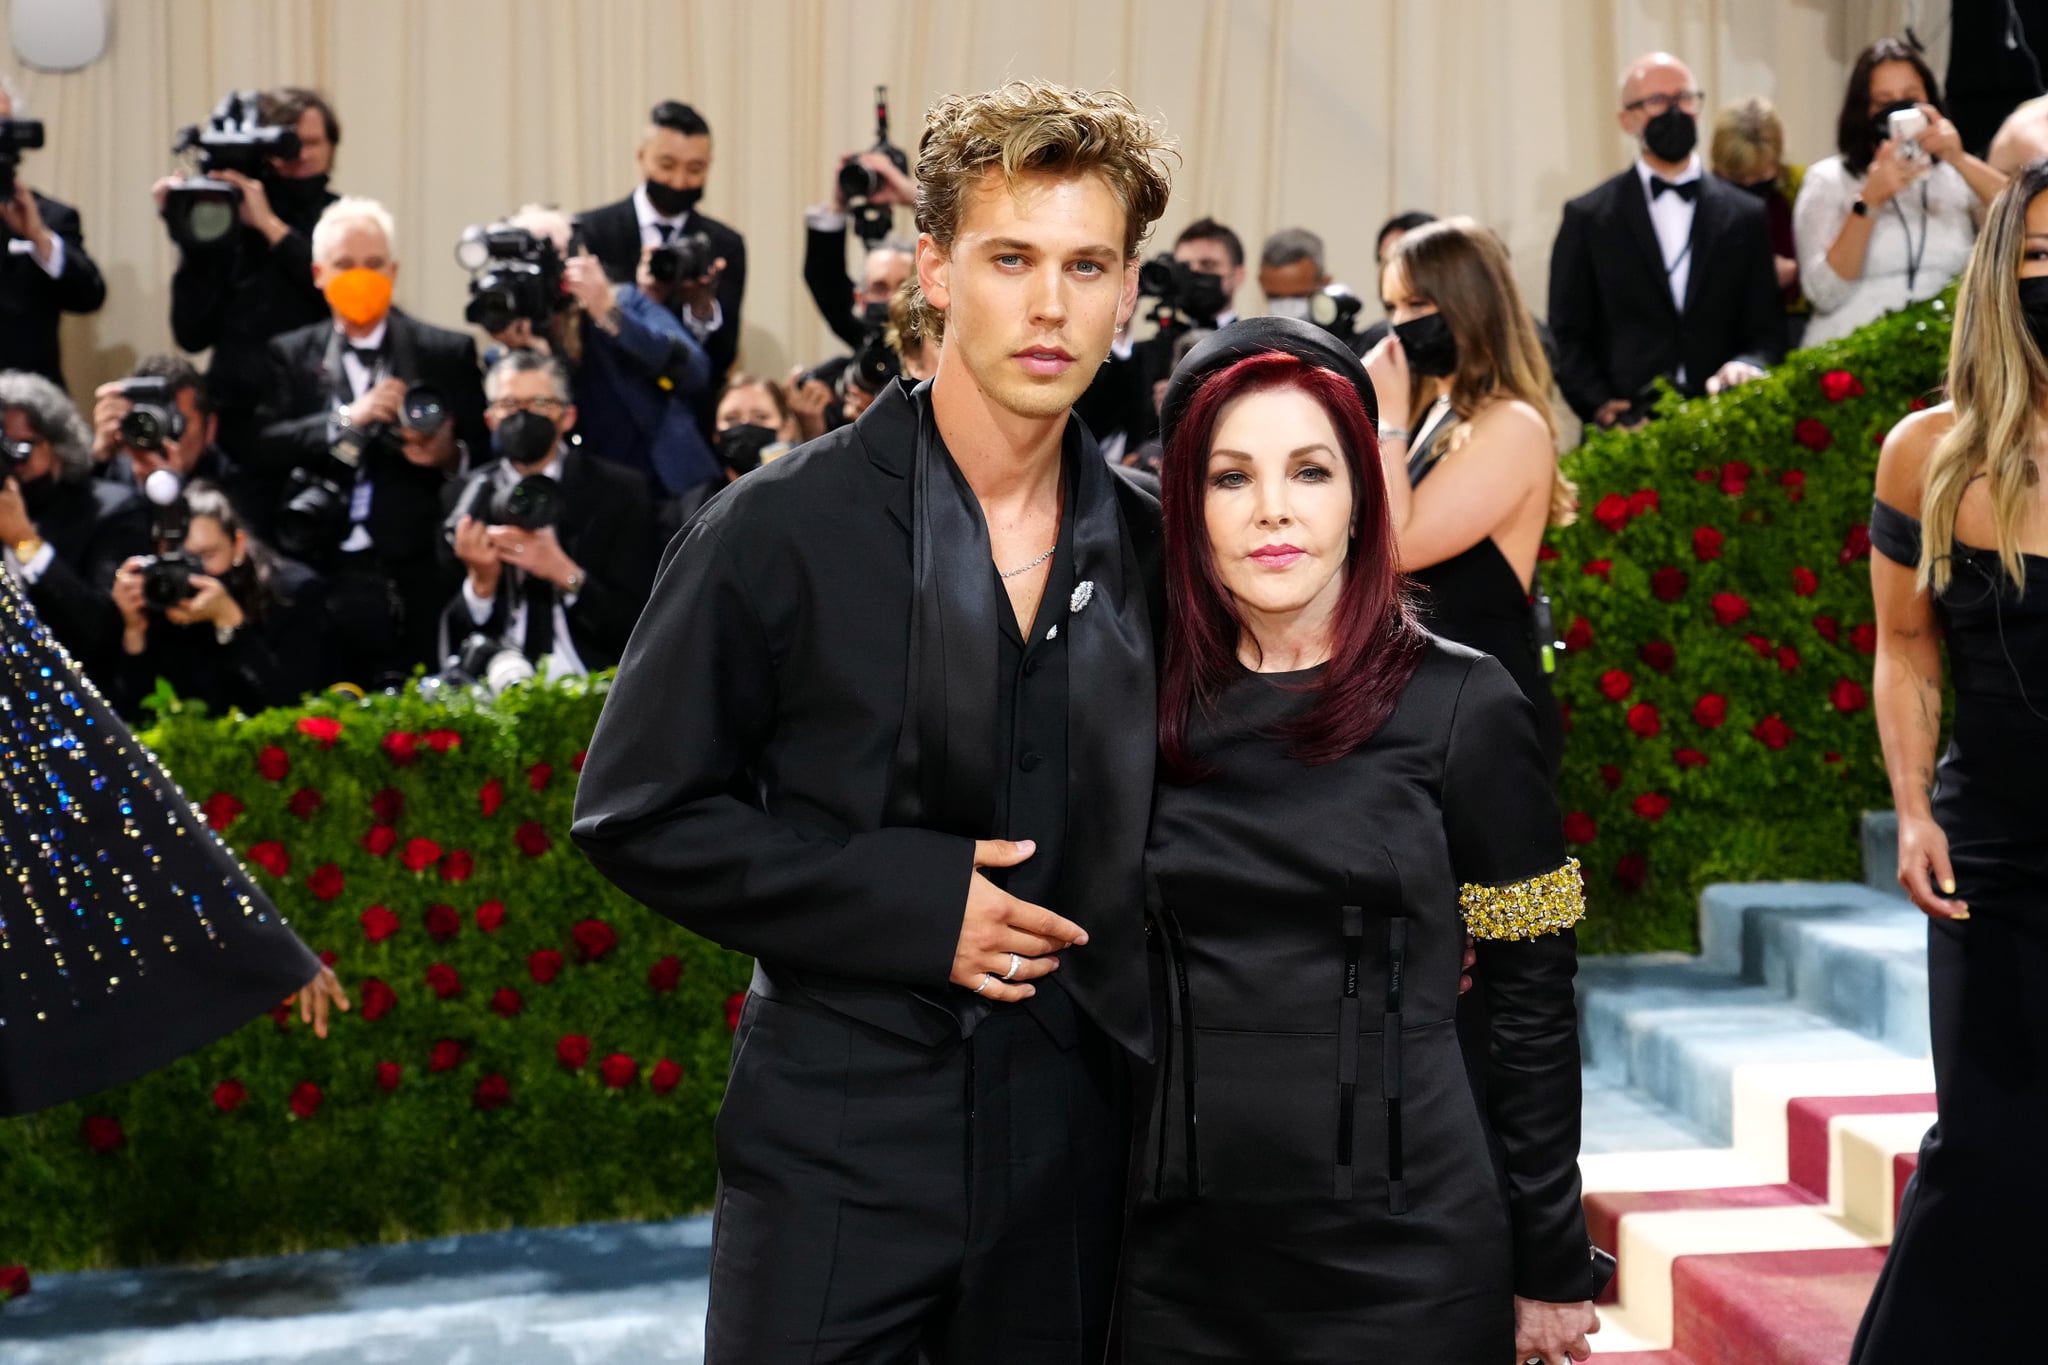 NEW YORK, NEW YORK - MAY 02: (L-R) Austin Butler and Priscilla Presley attend The 2022 Met Gala Celebrating